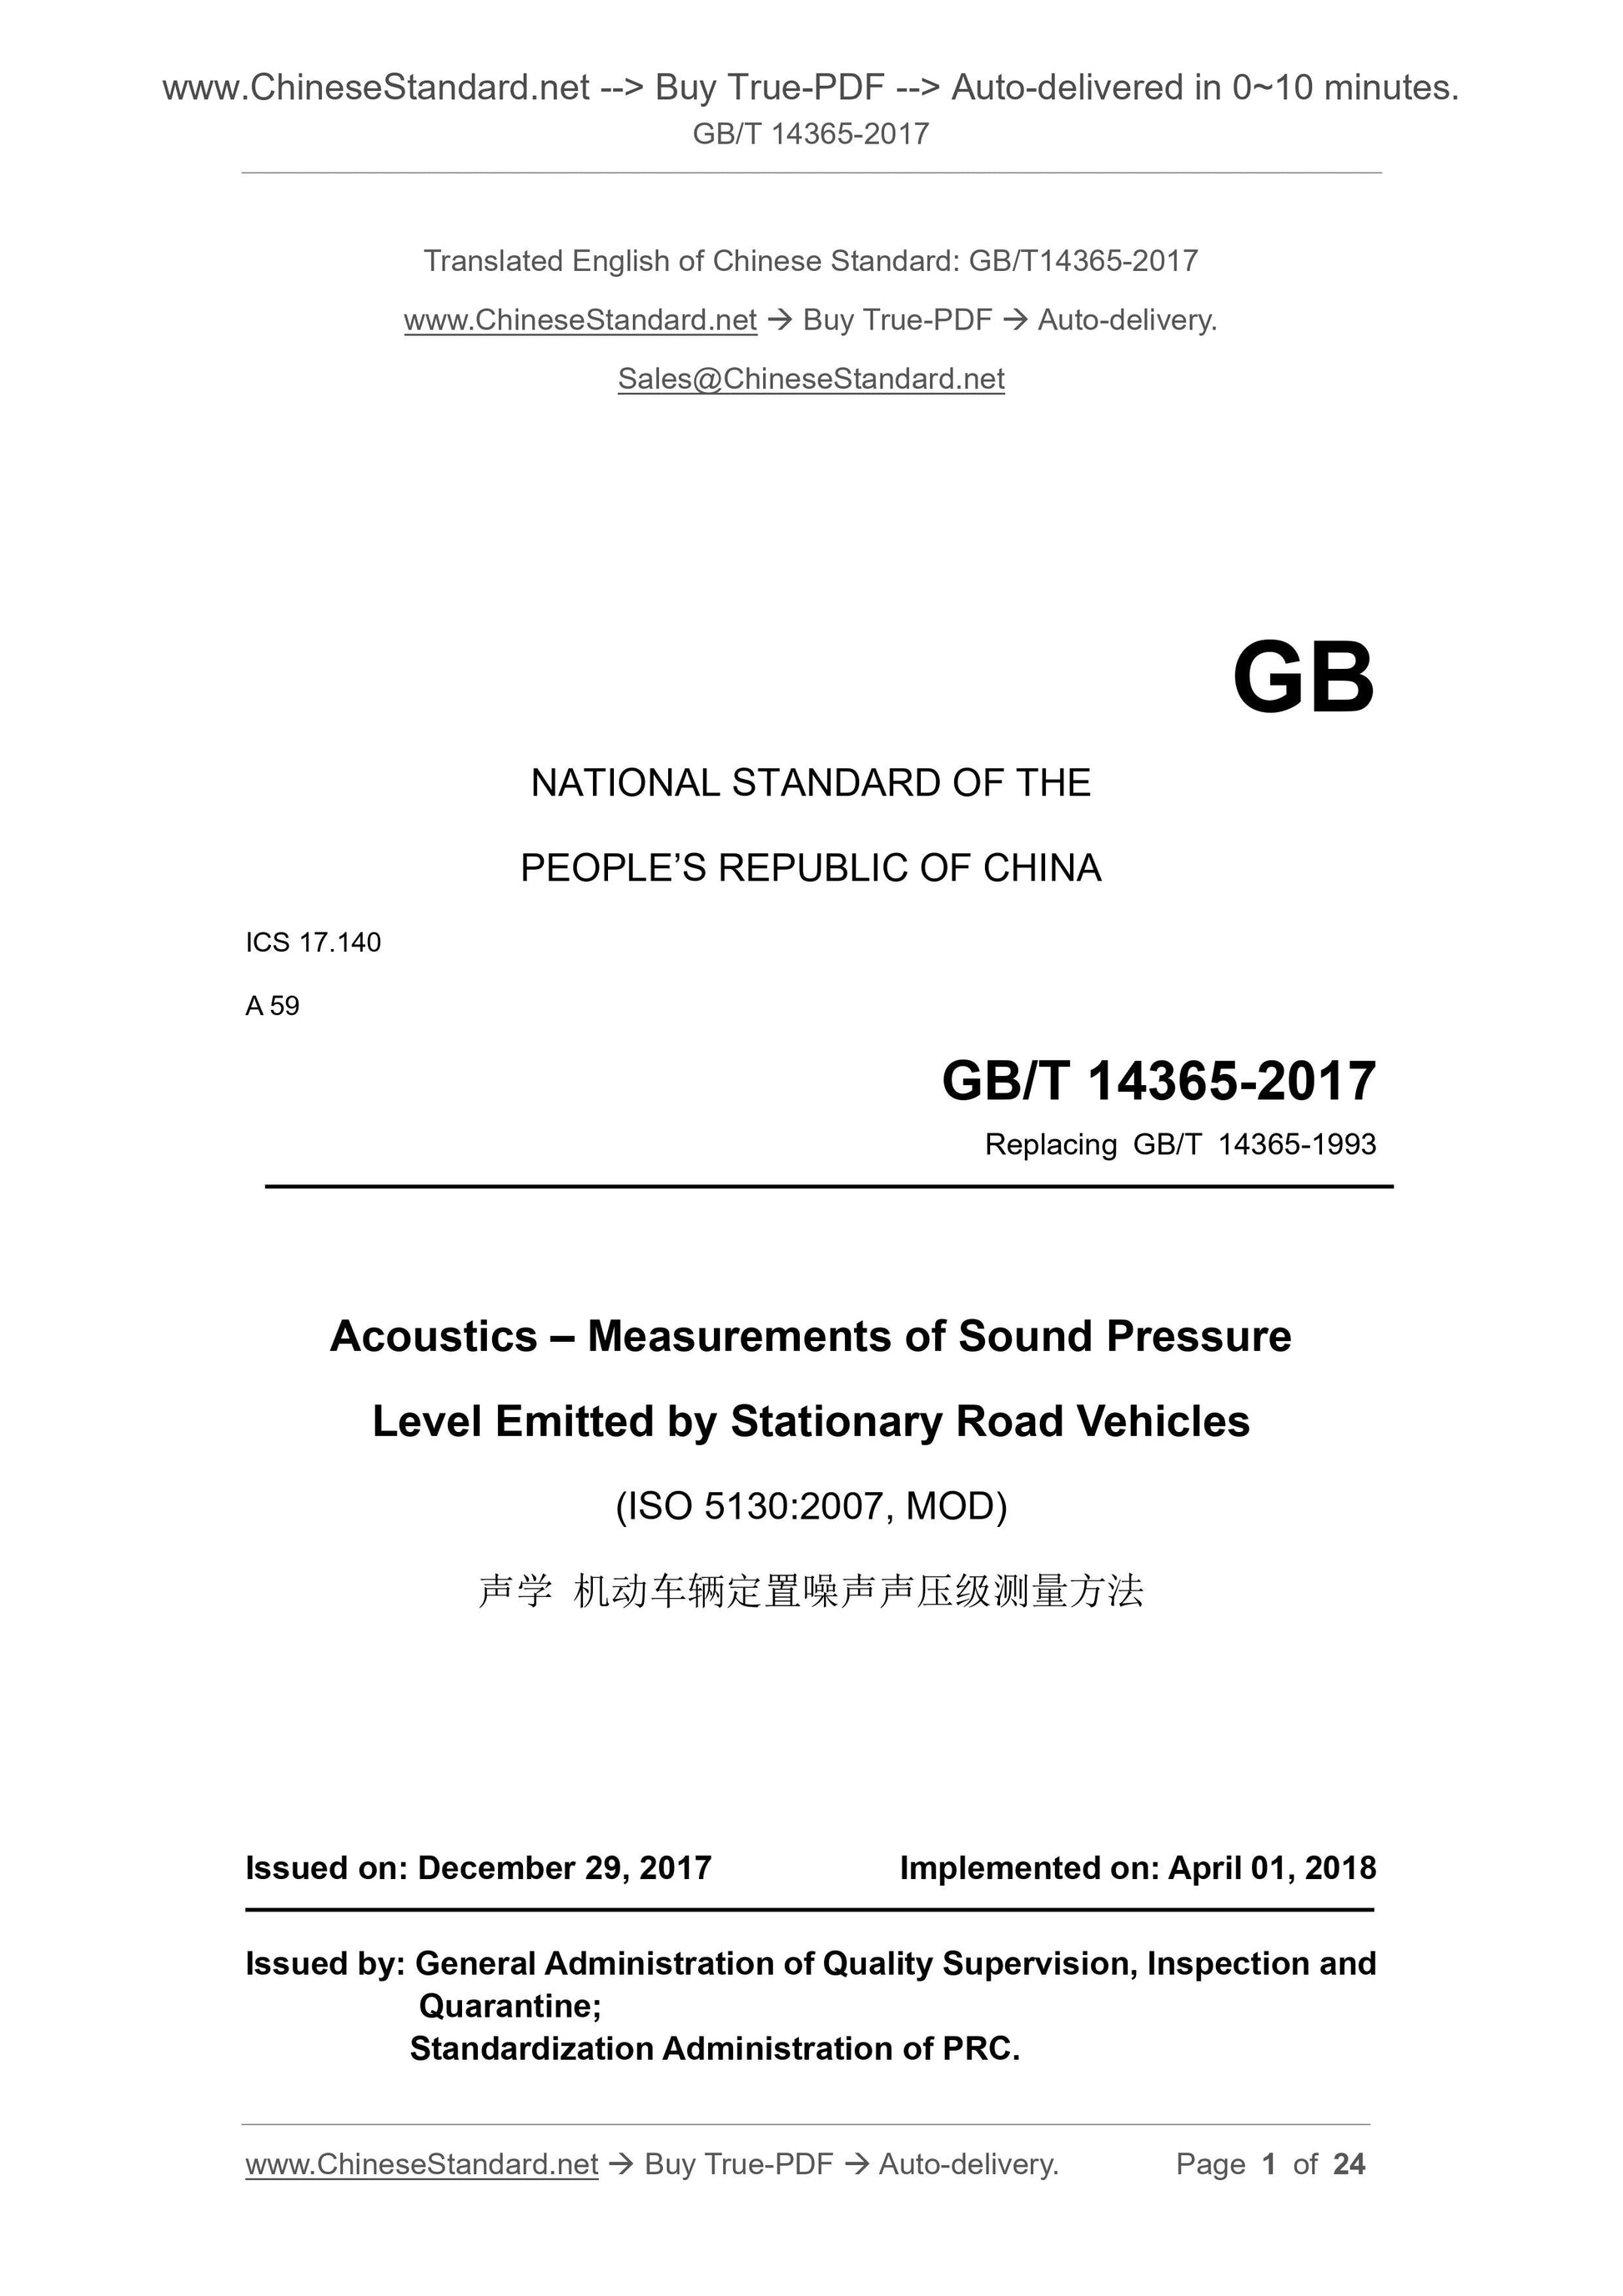 GB/T 14365-2017 Page 1